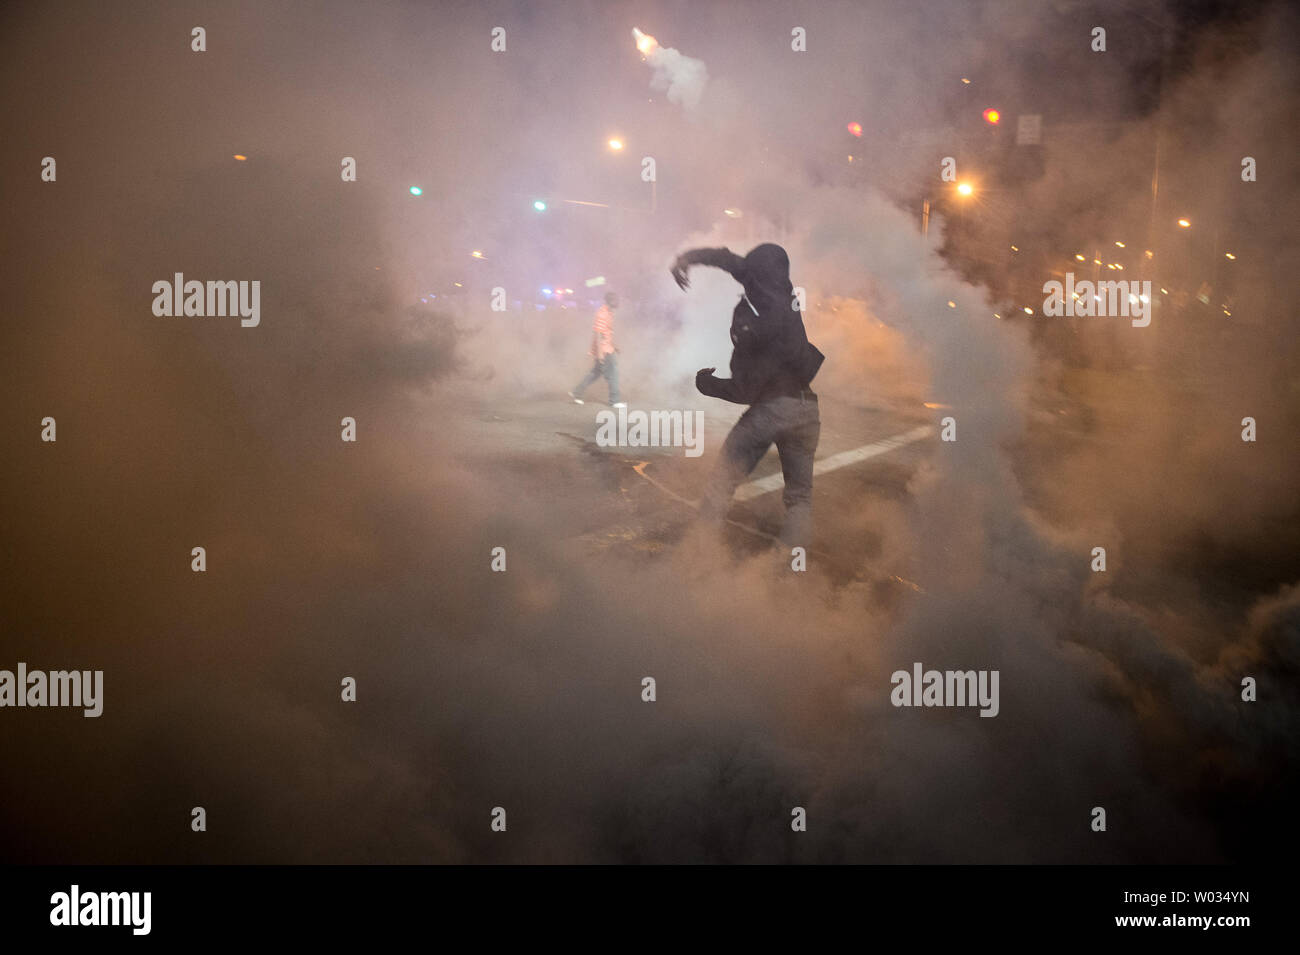 Tear gas is used during demonstrations in Baltimore, Maryland after the 10 p.m. curfew passed on April 28, 2015.  Protests have erupted after death of Freddie Gray. Photo by Ken Cedeno/UPI. Stock Photo